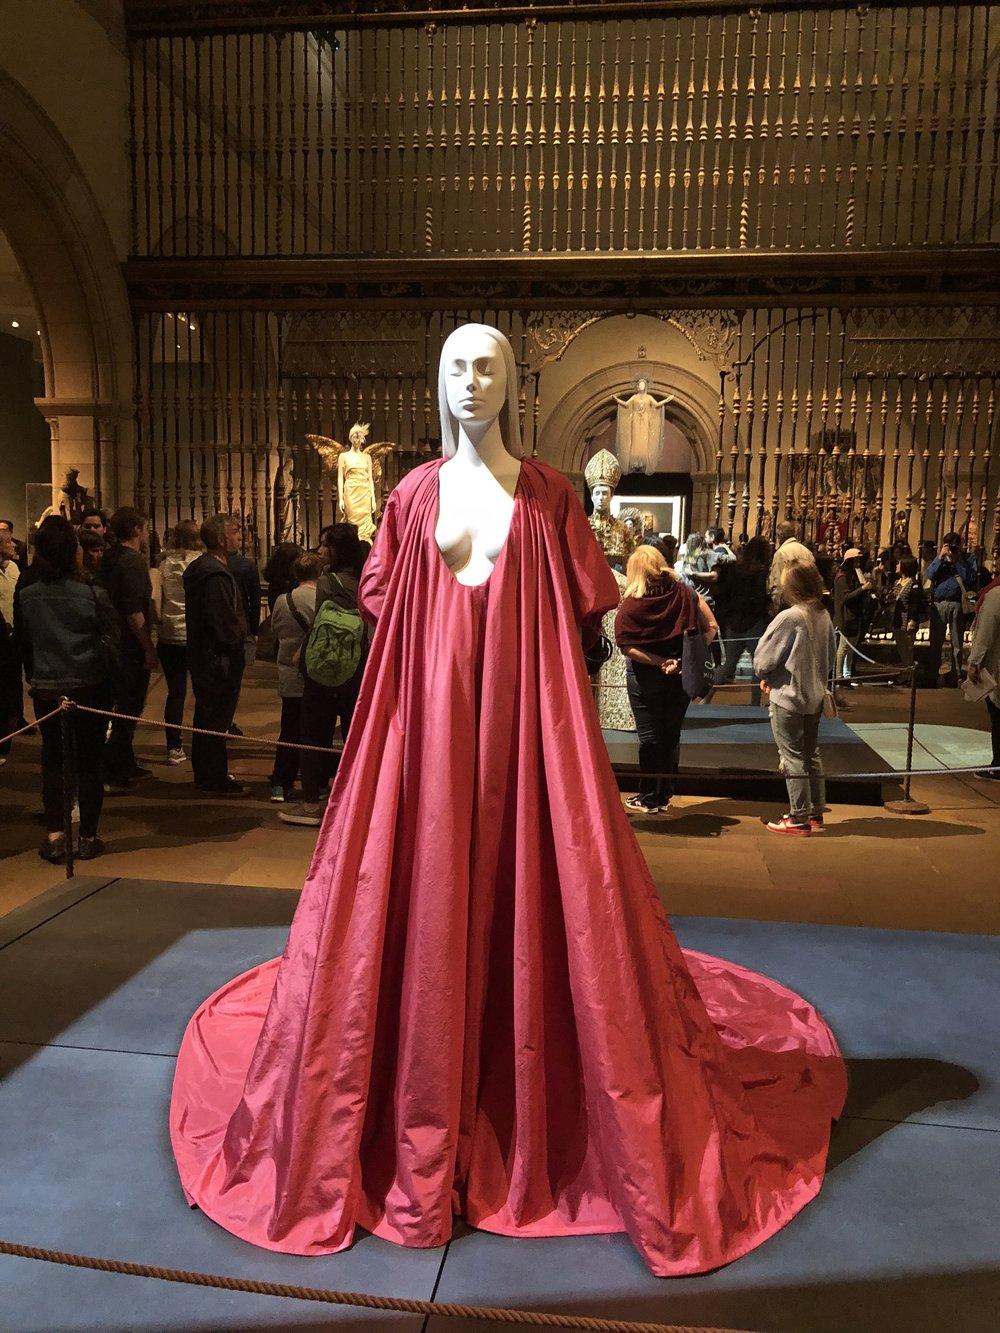 Mannequin wearing a red maxi dress in The Metropolitan Museum of Art